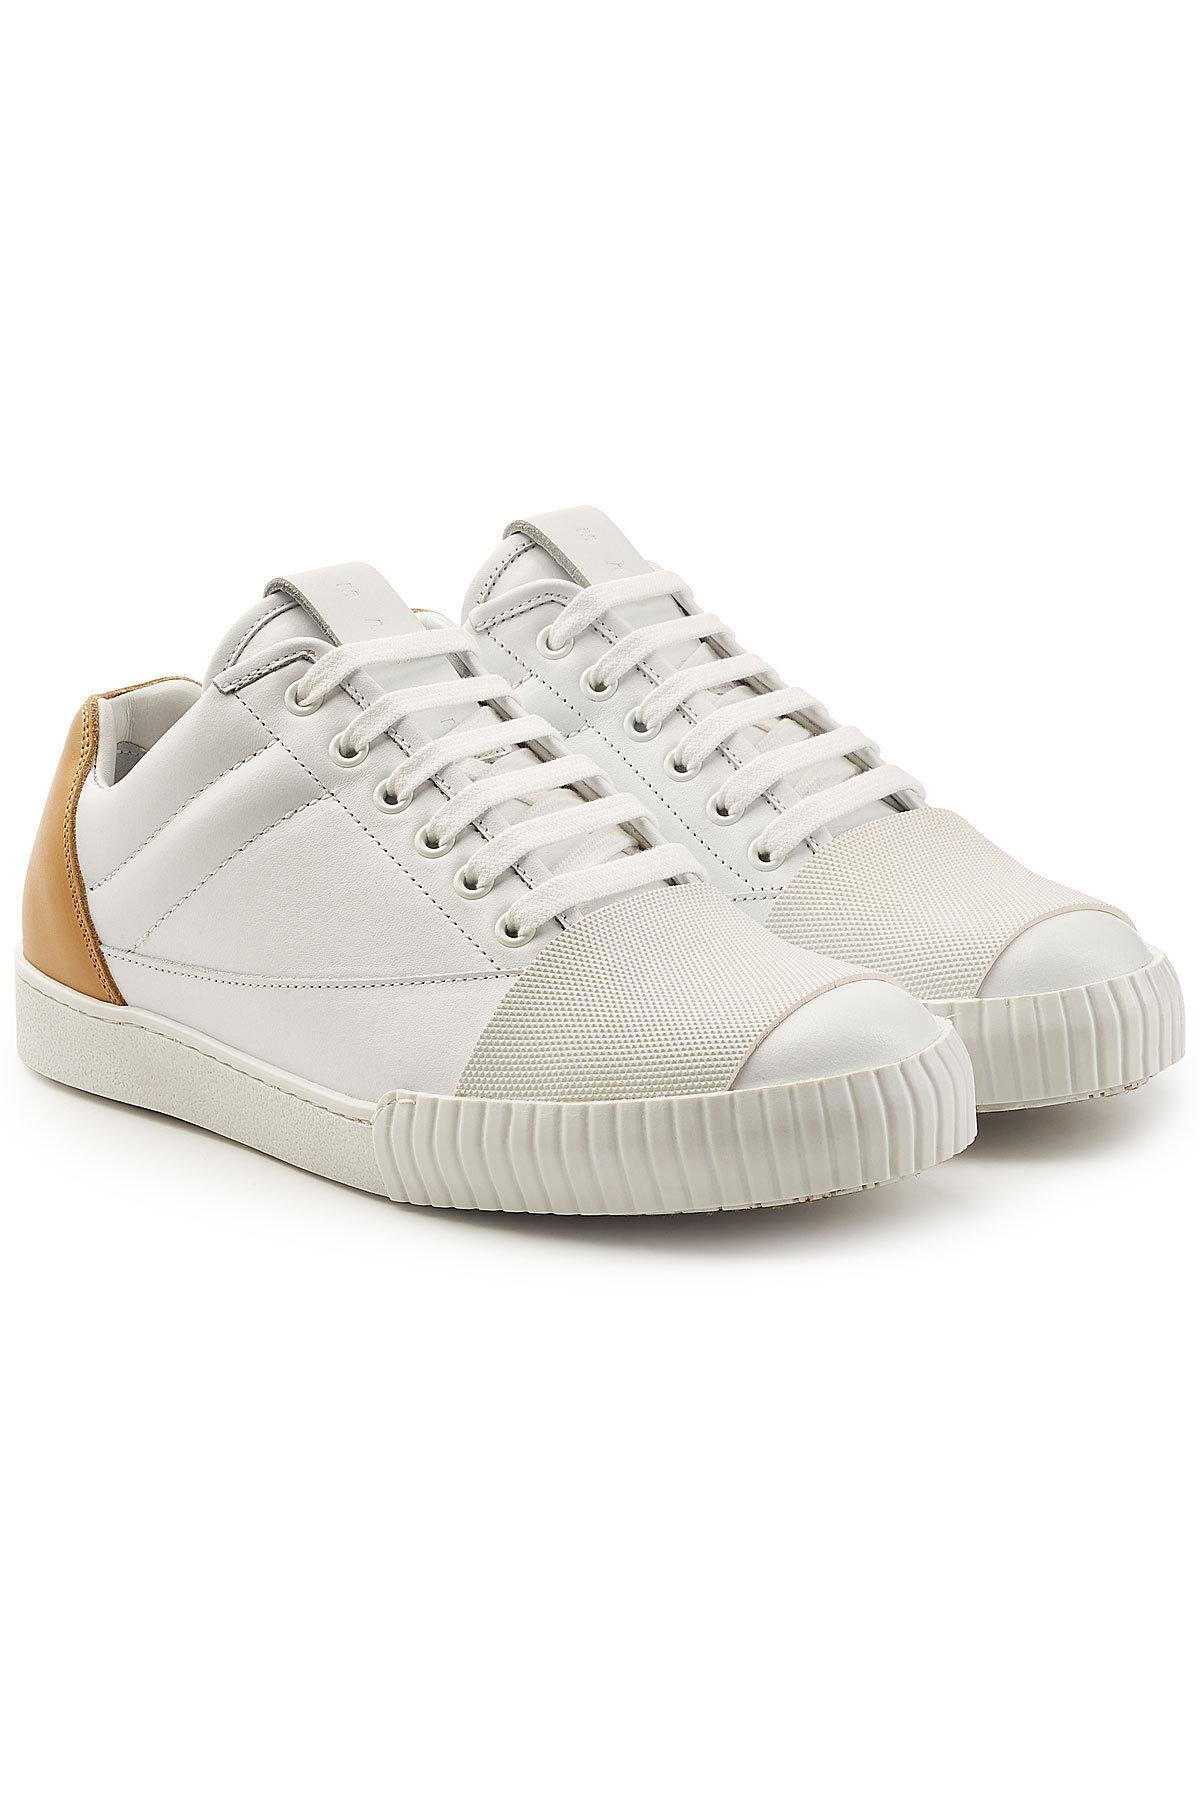 Marni Leather Sneakers In White | ModeSens